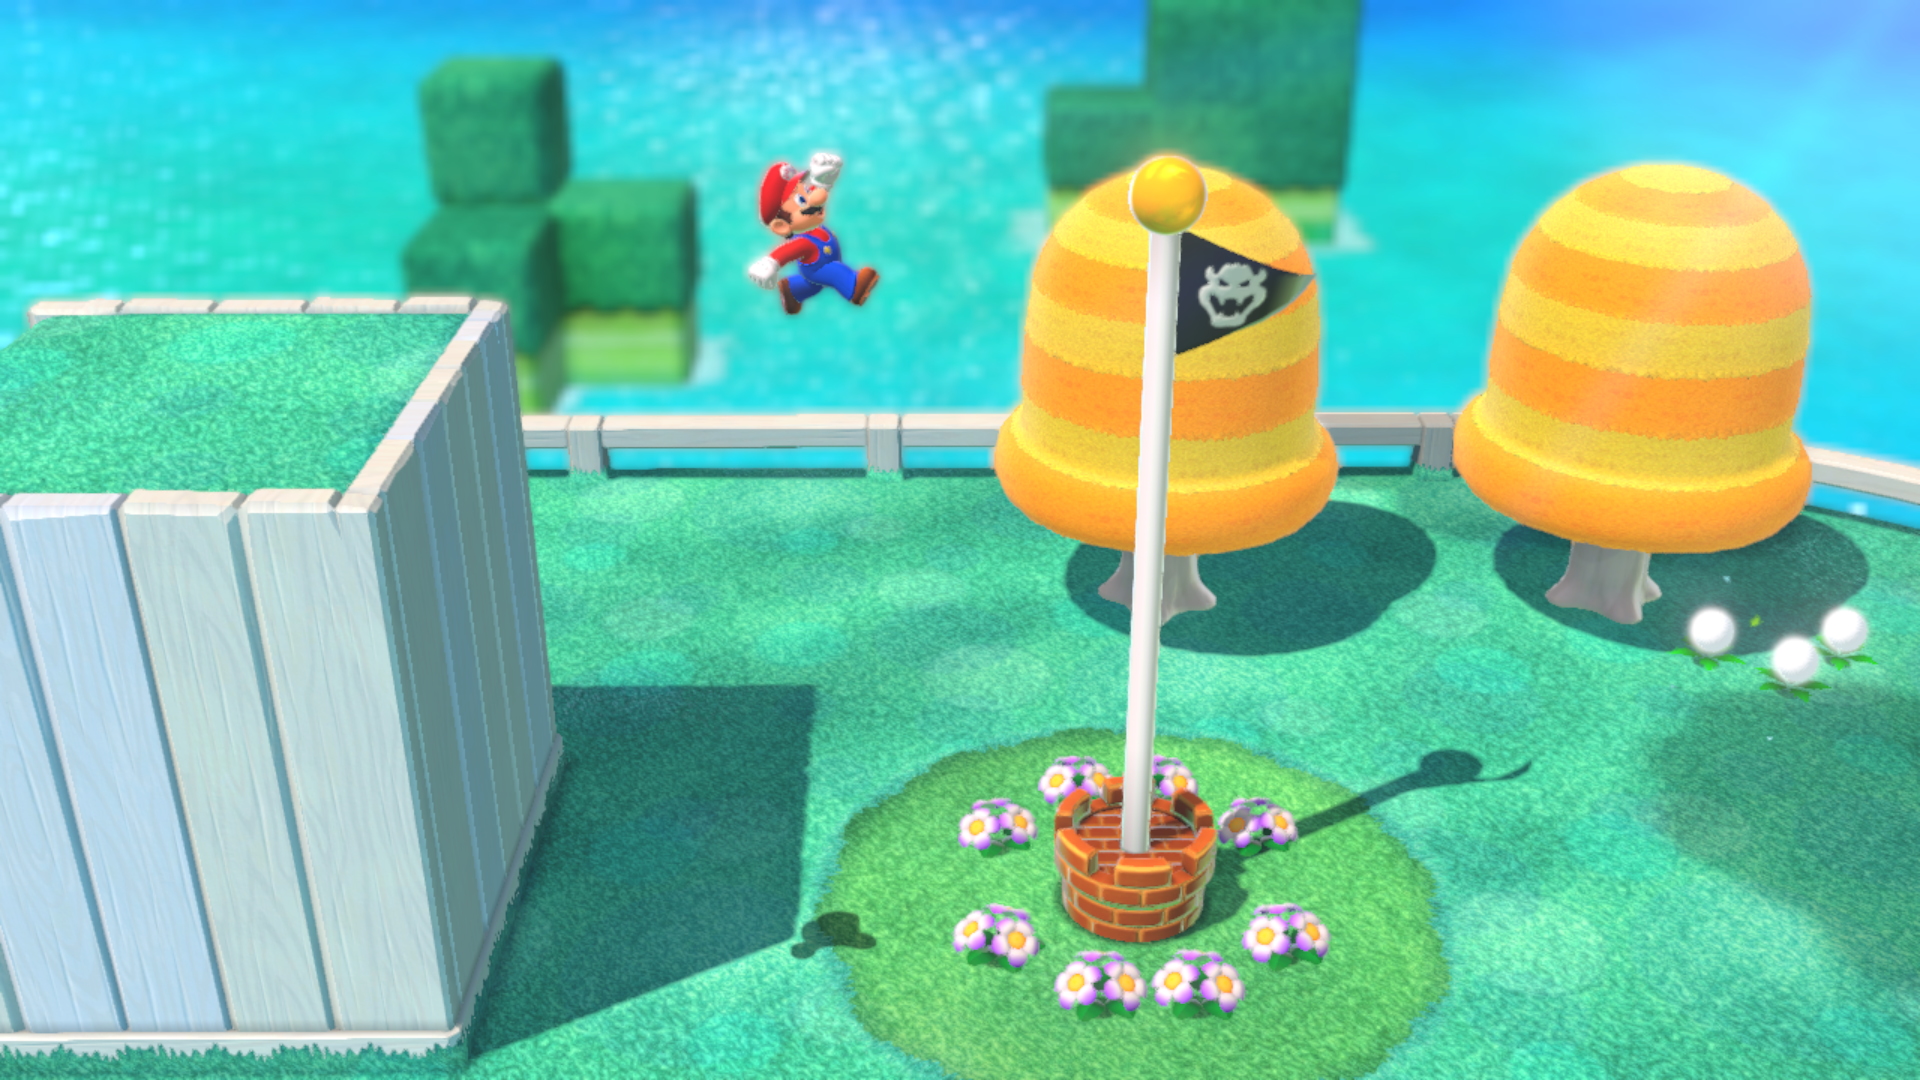 Does Super Mario 3D World + Bowser's Fury have online multiplayer?